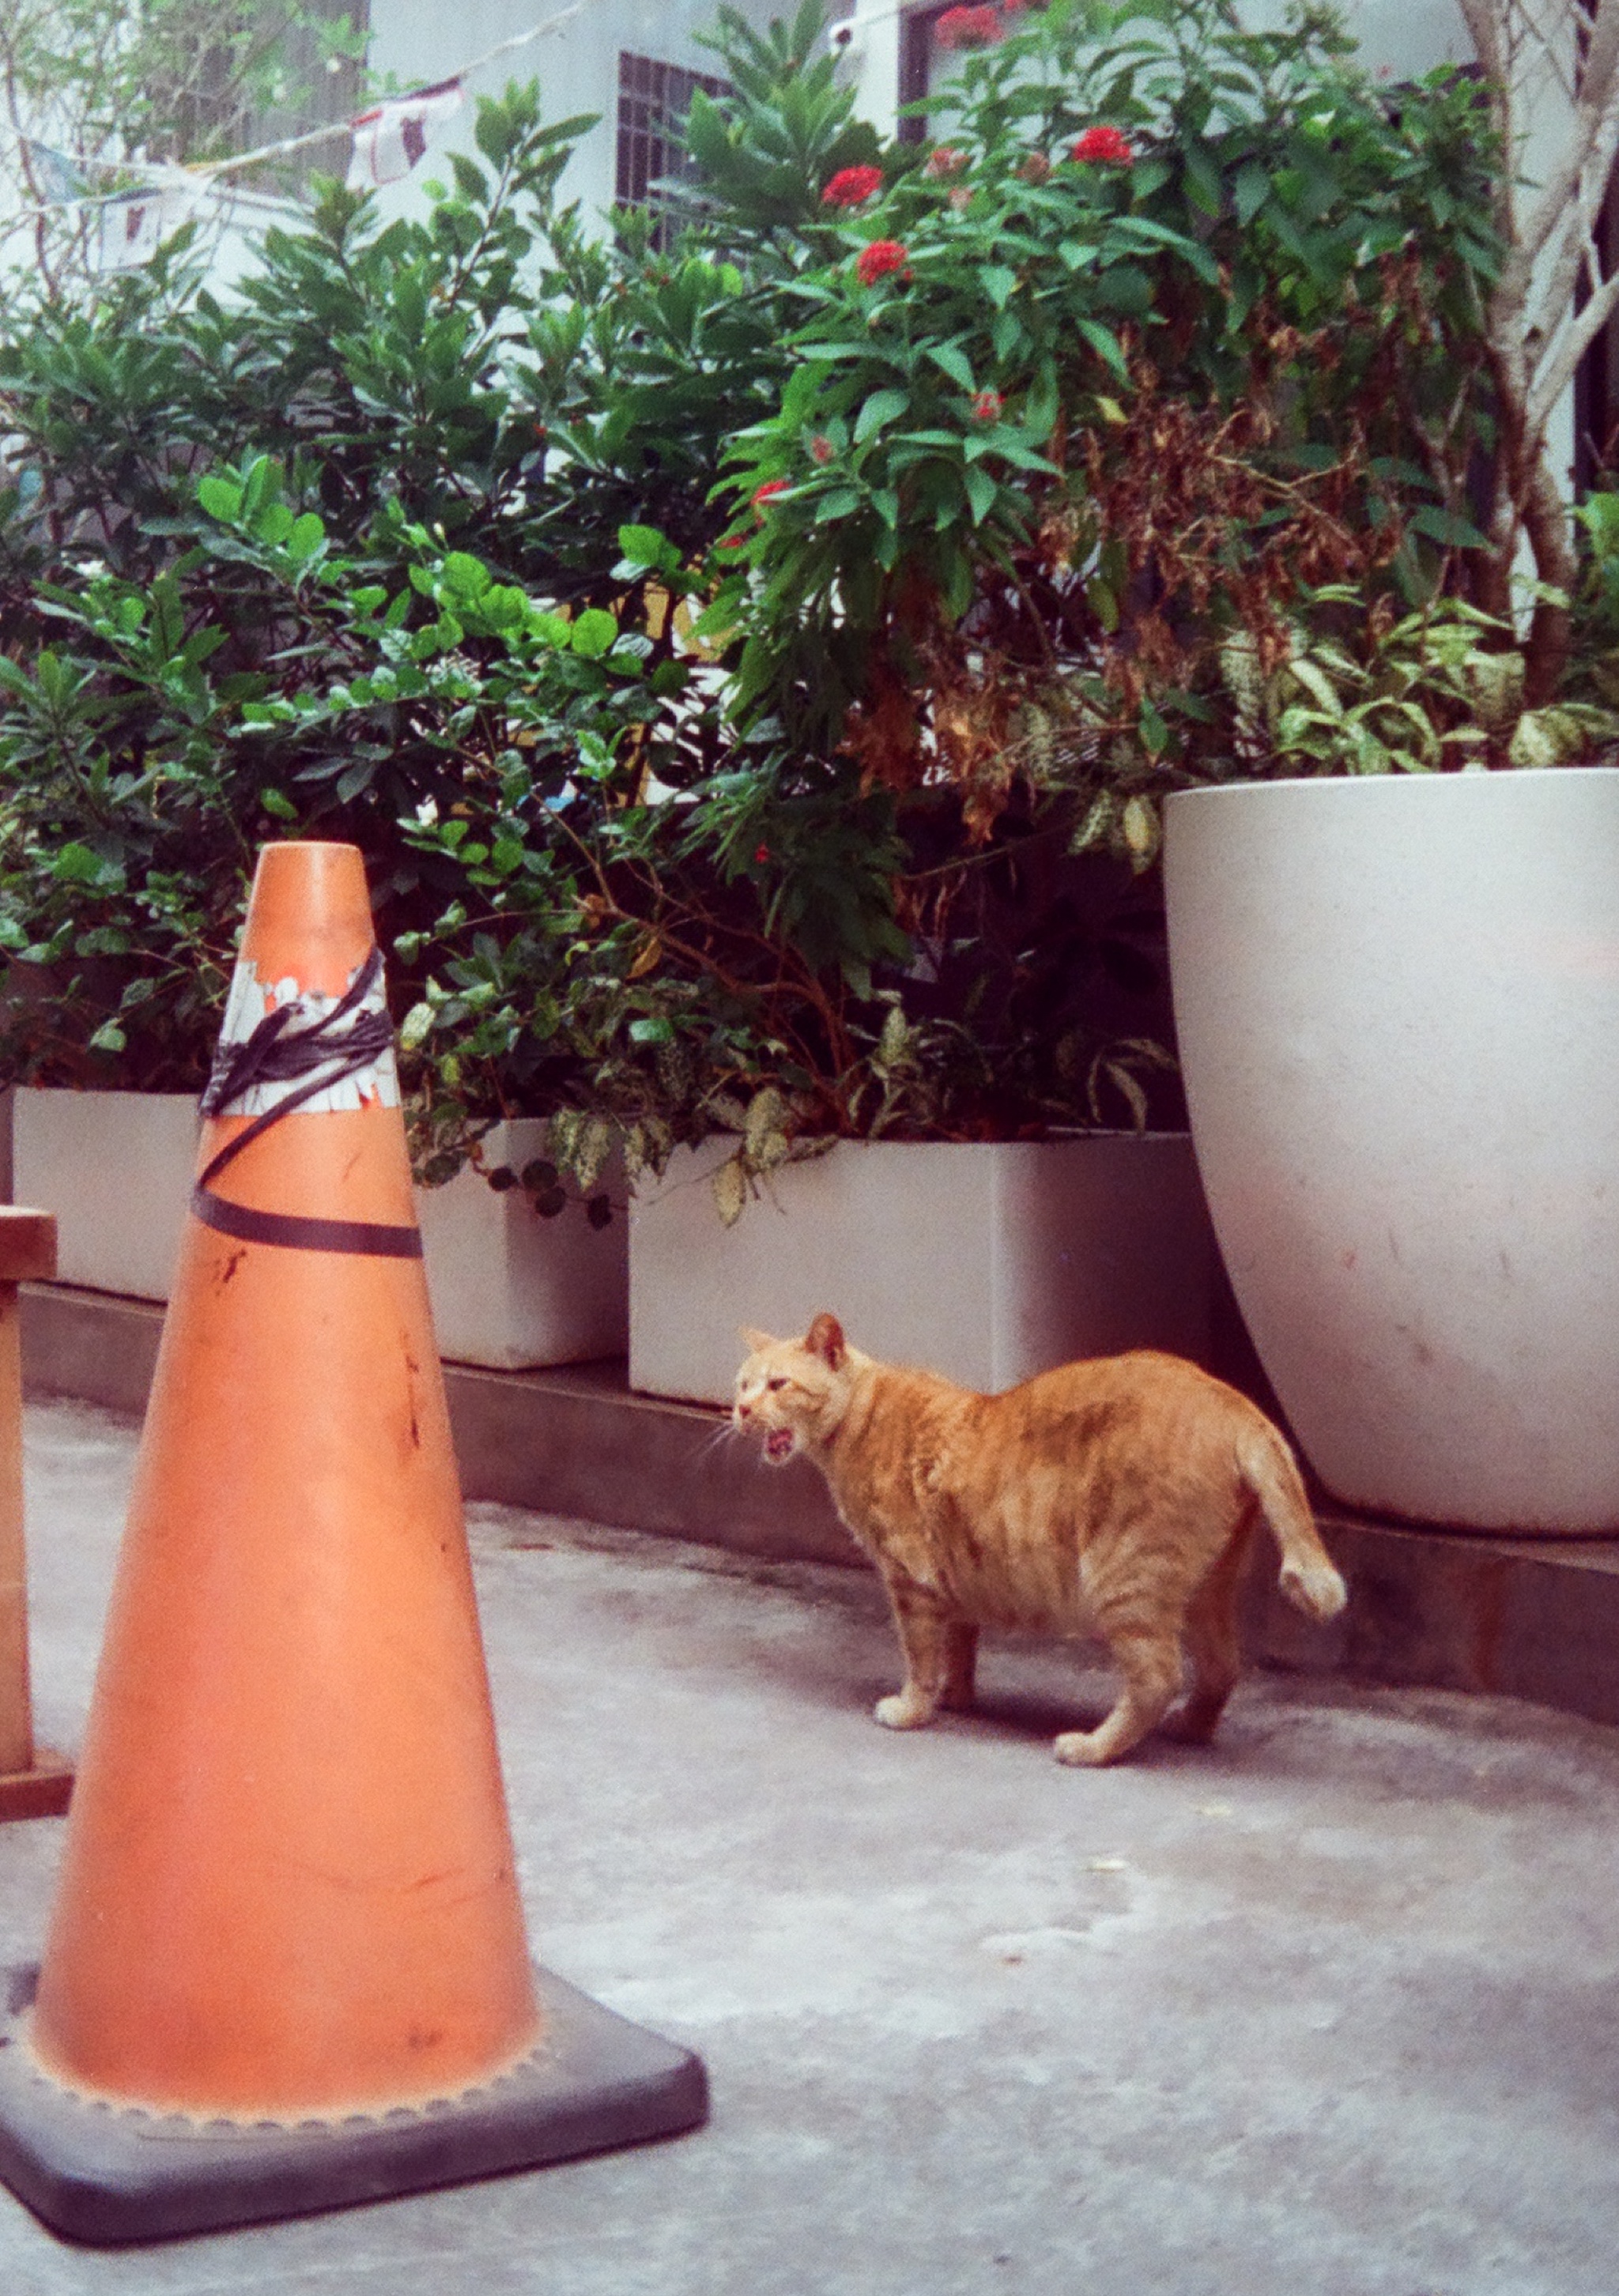 a cat standing next to a traffic cone with its mouth open wide